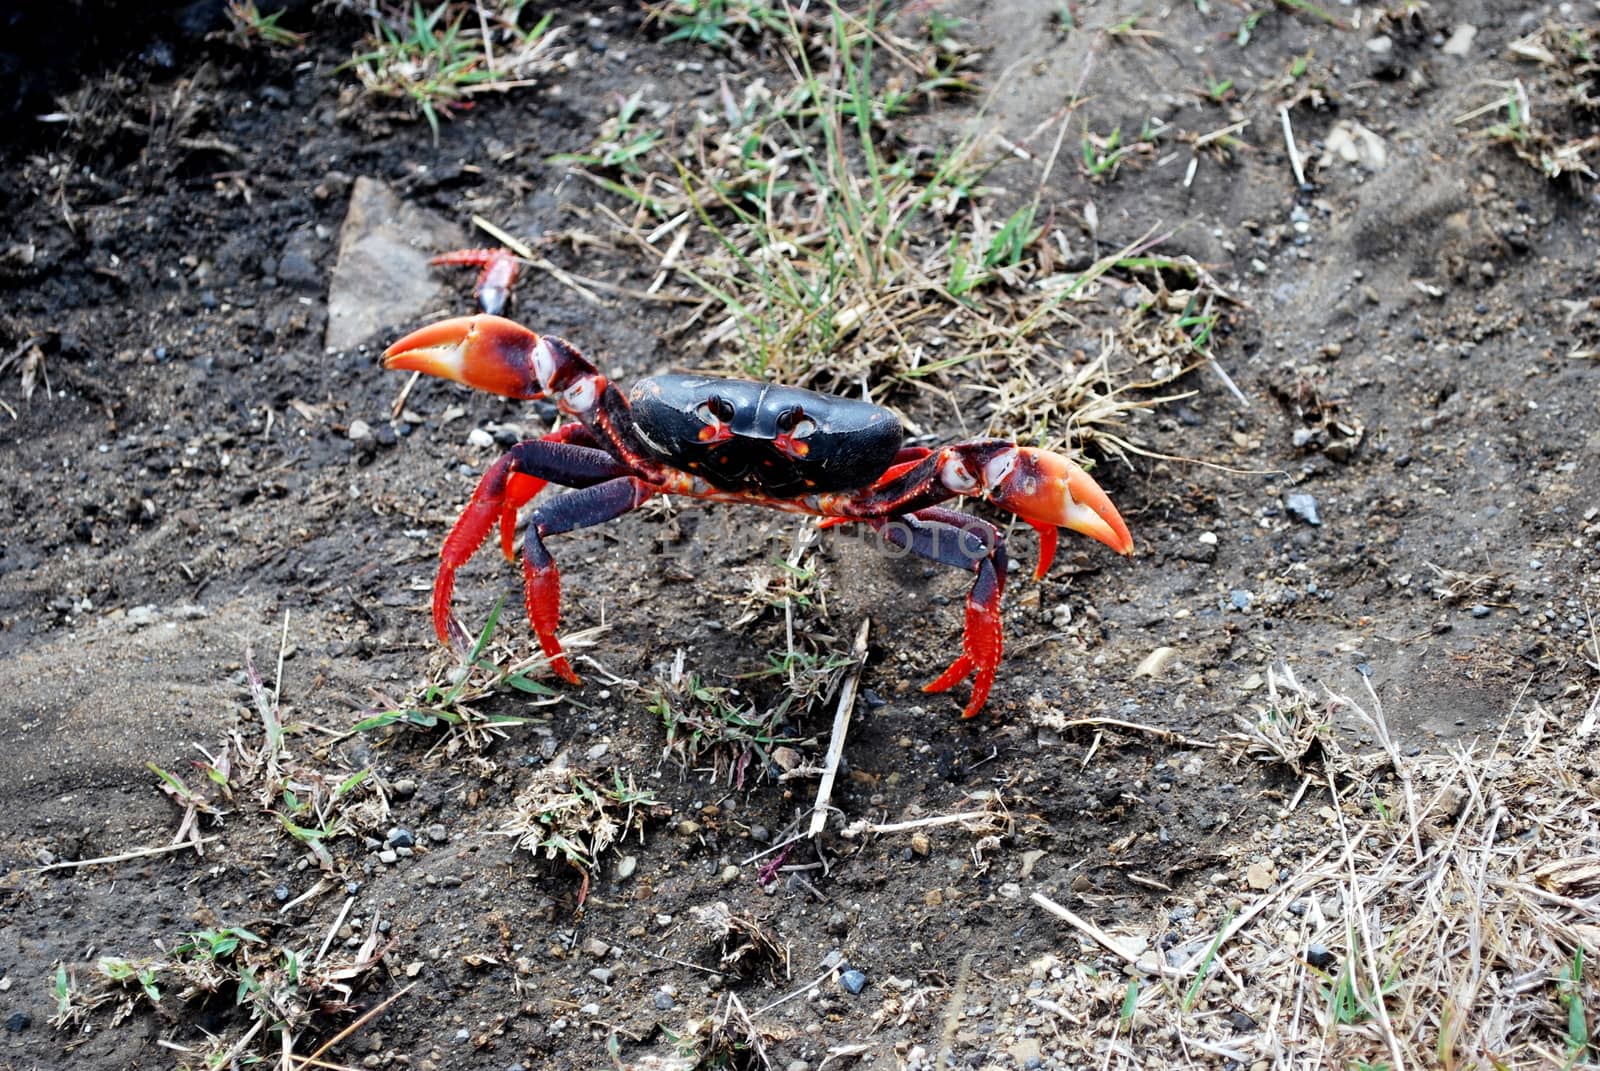 A crab threatening with colors black and orange.